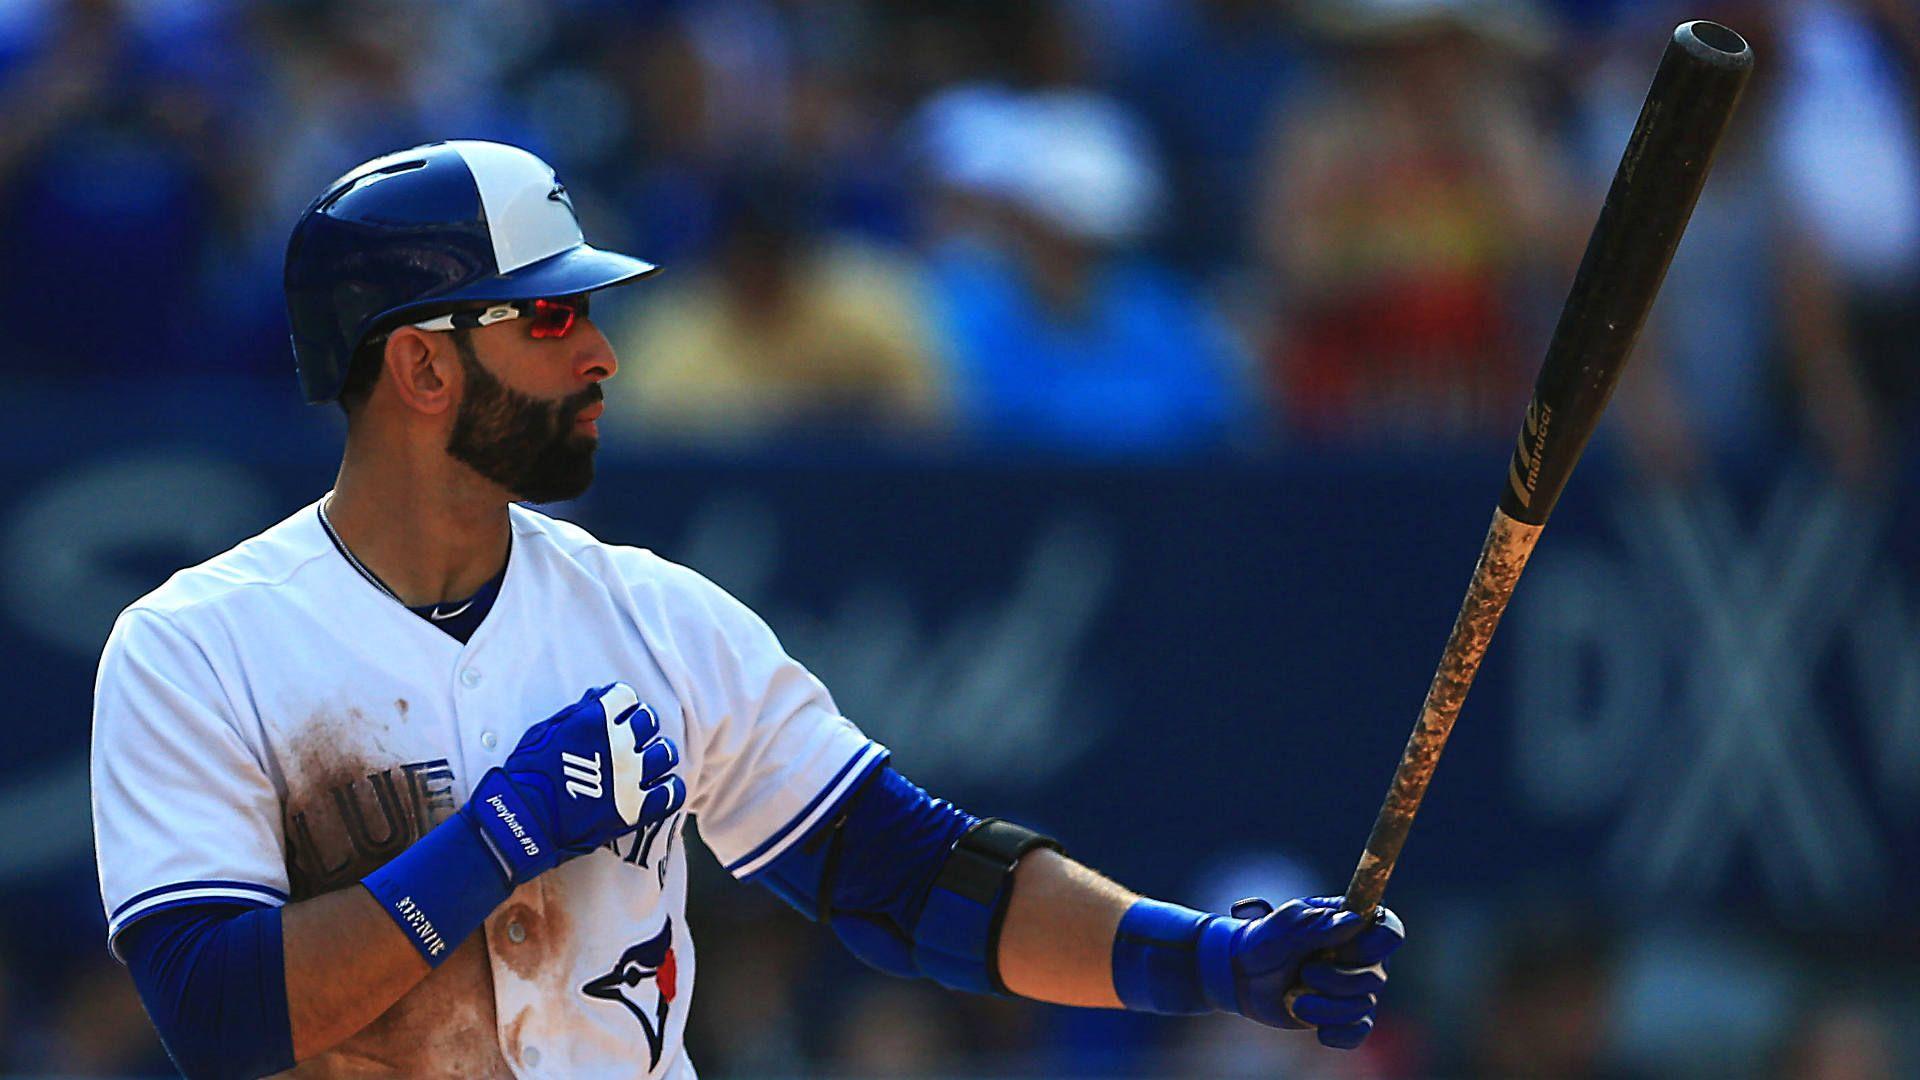 things that had to happen for Jose Bautista to become a superstar